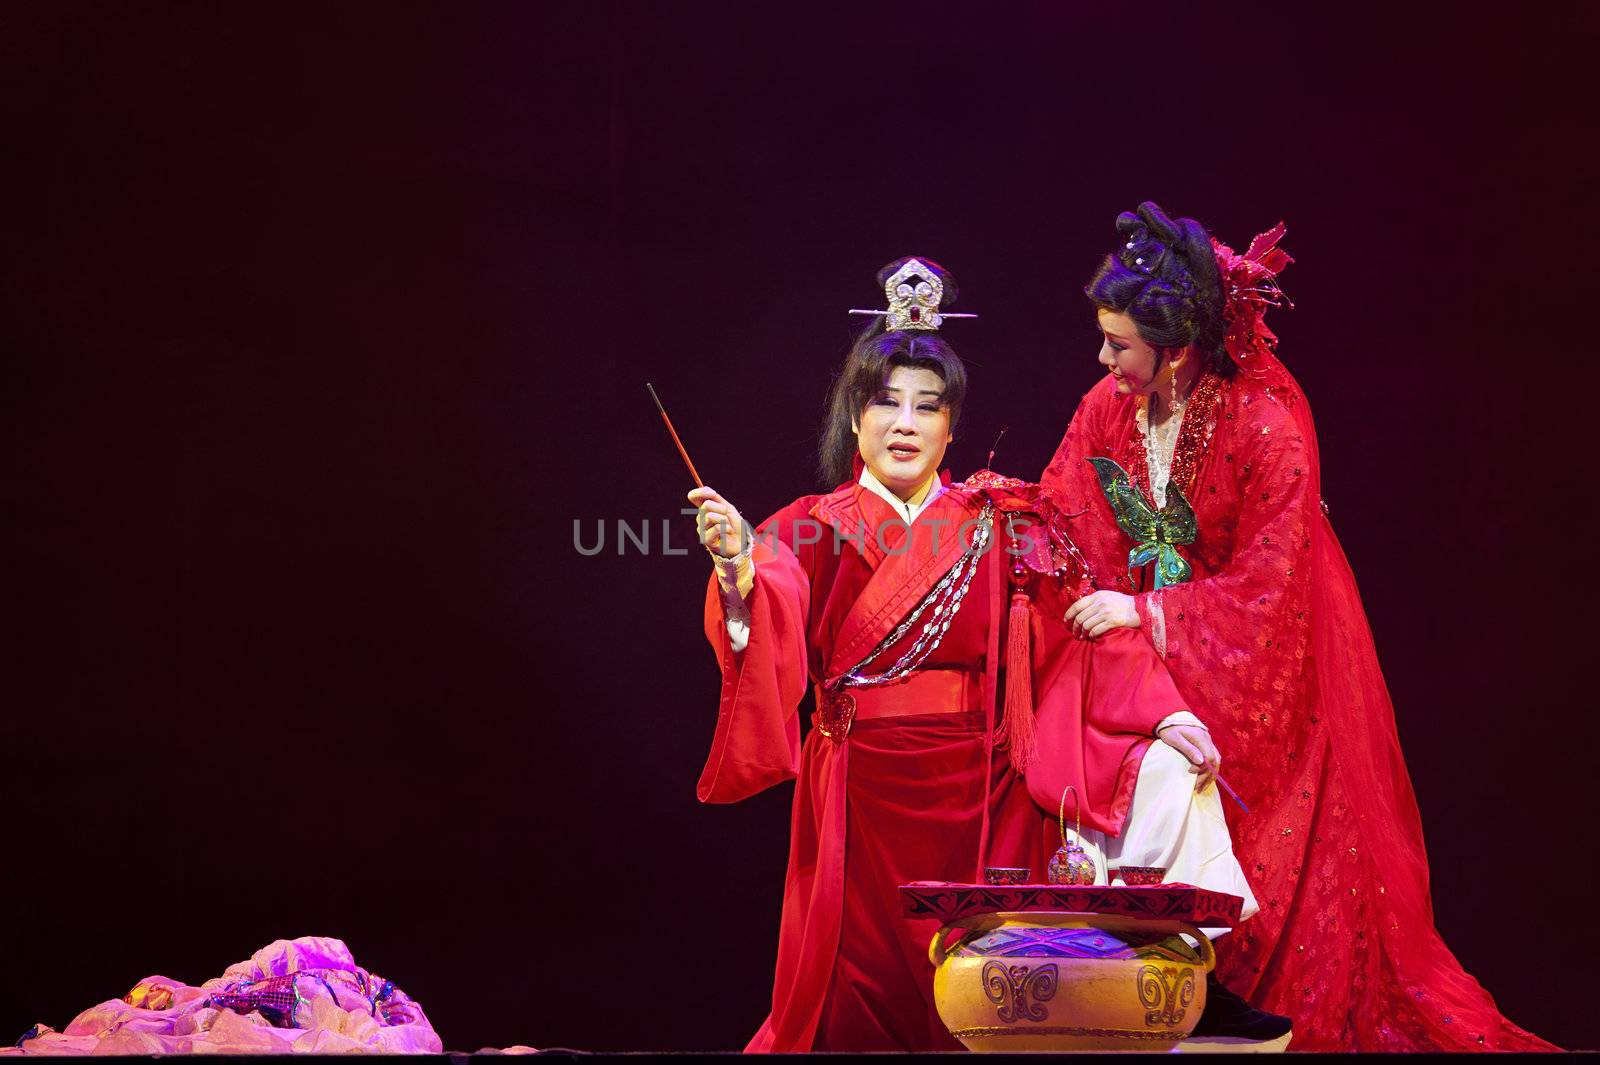 CHENGDU - MAY 31: chinese Yue opera performer make a show on stage to compete for awards in 25th Chinese Drama Plum Blossom Award competition at Experimental theater.May 31, 2011 in Chengdu, China.
Chinese Drama Plum Blossom Award is the highest theatrical award in China.